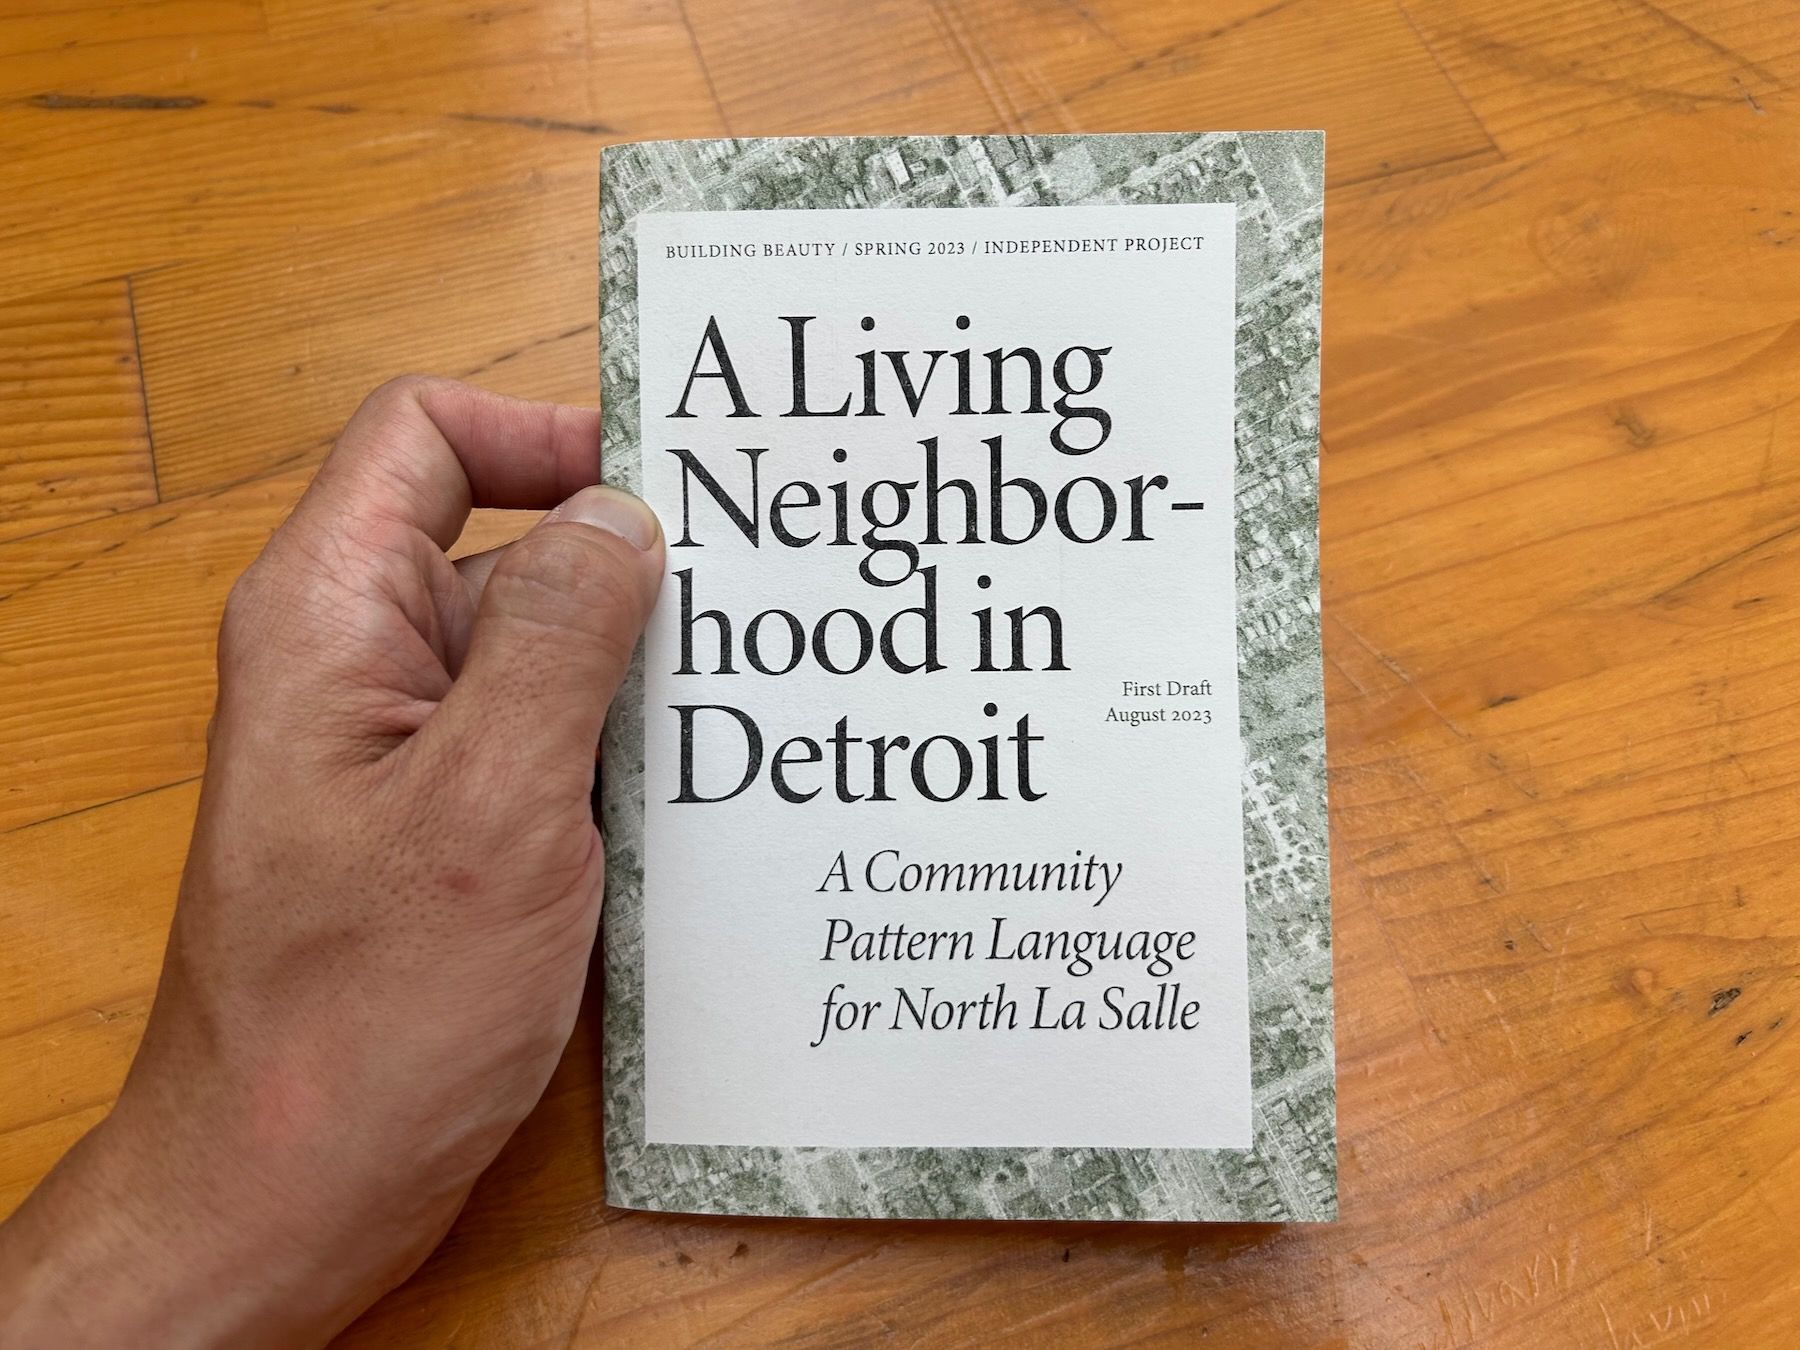 Hand holding cover of zine, titled “A Living Neighborhood in Detroit”